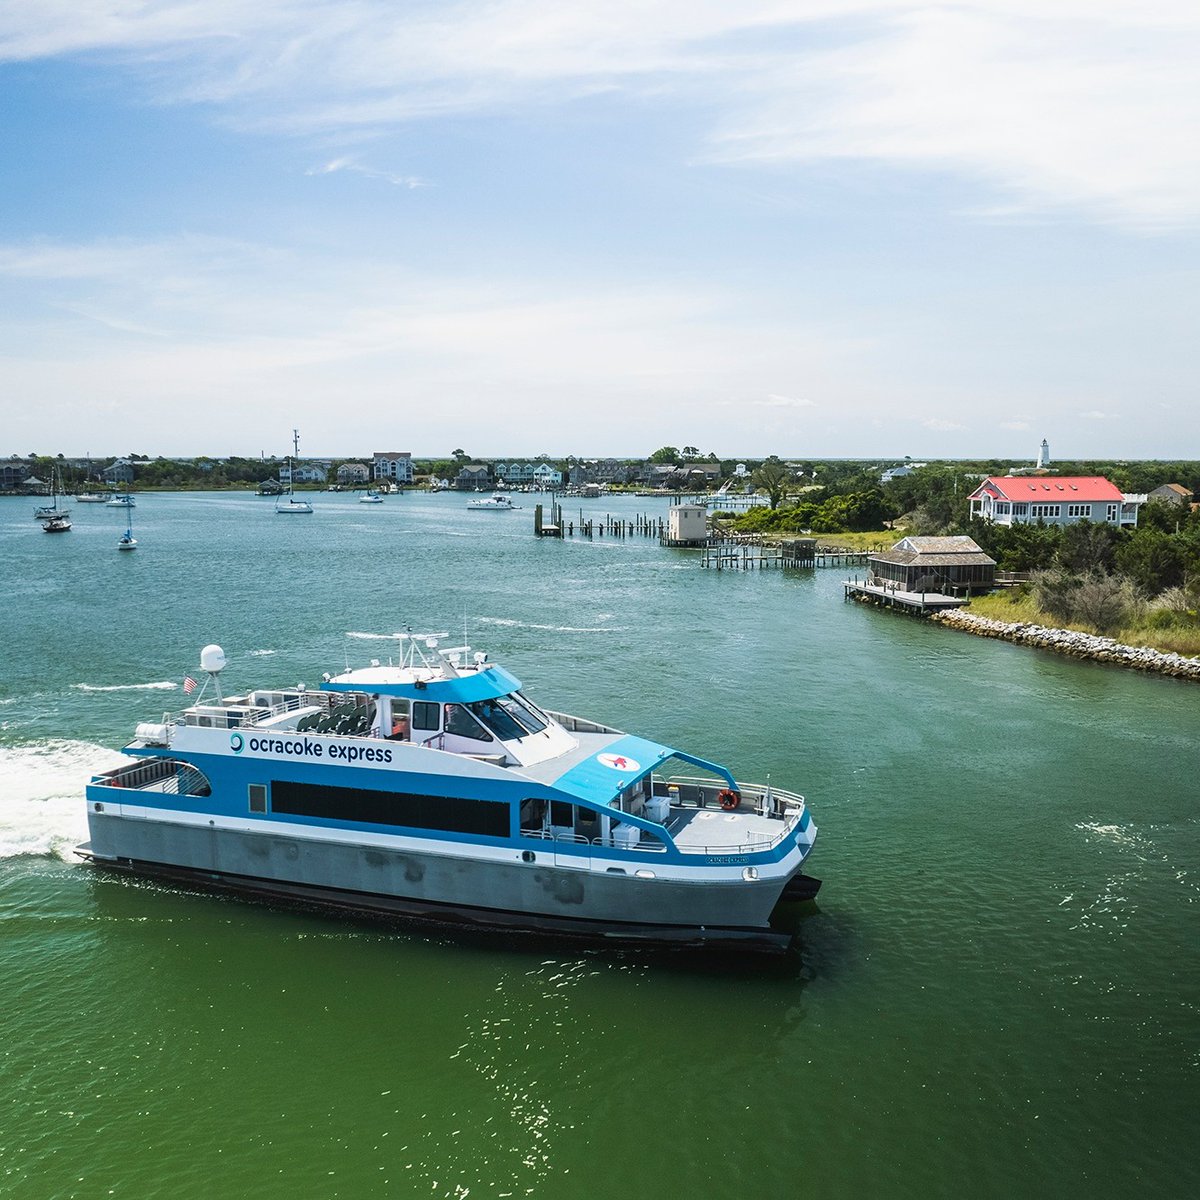 The Ocracoke Express Passenger Ferry and the Ocracoke Village Tram are now running for the summer season! Book your passenger ferry tickets here 👉 bit.ly/4bNMXdu #visitocracoke #visitnc #ocracoke #outerbaks #obx #nc #northcarolina #island #travel #passengerferry